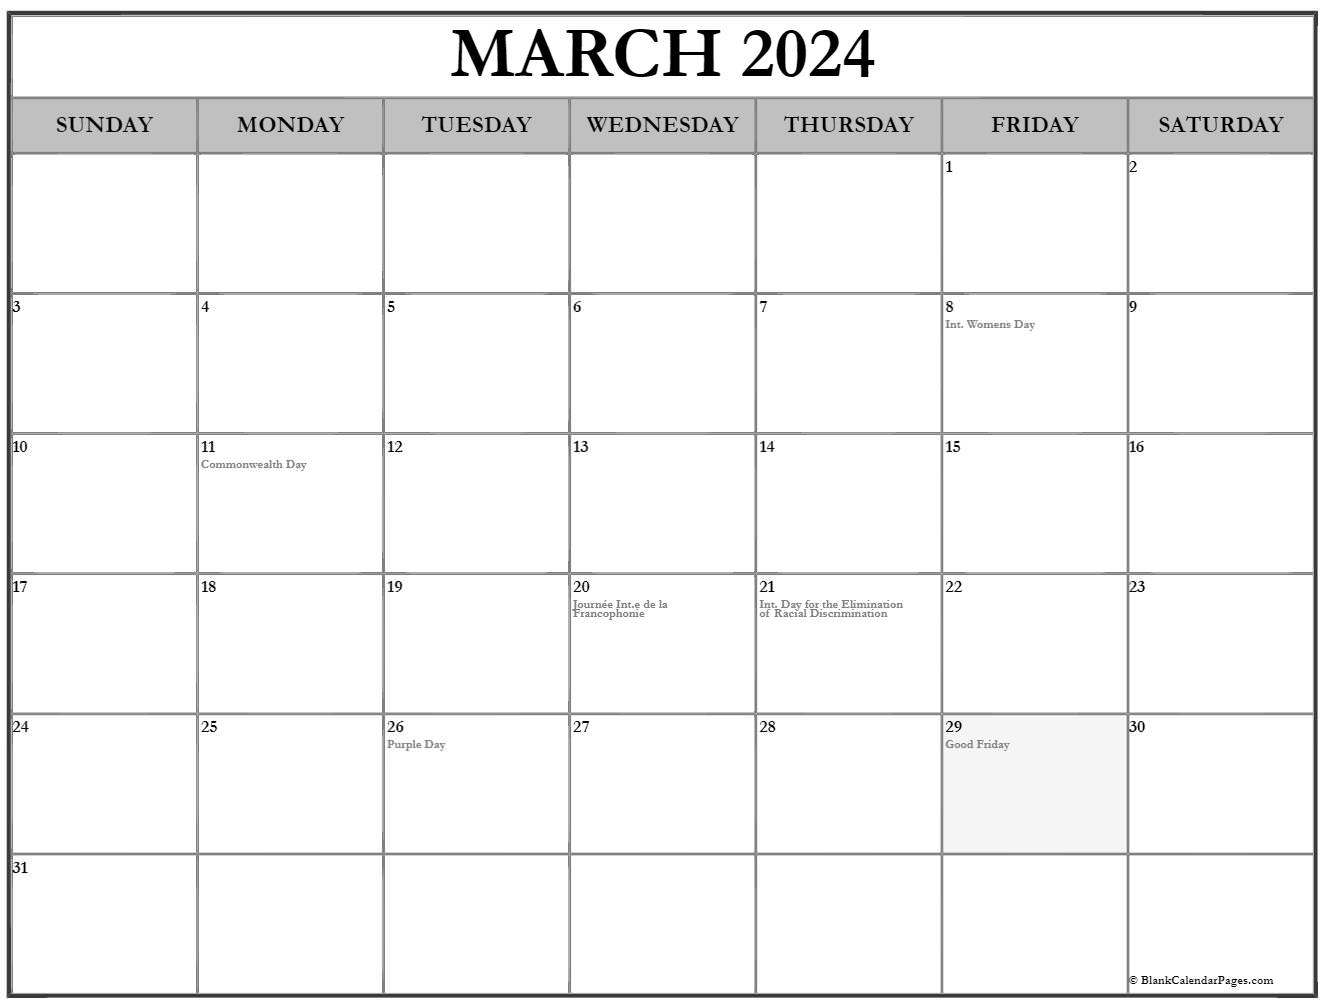 Collection of March 2021 calendars with holidays